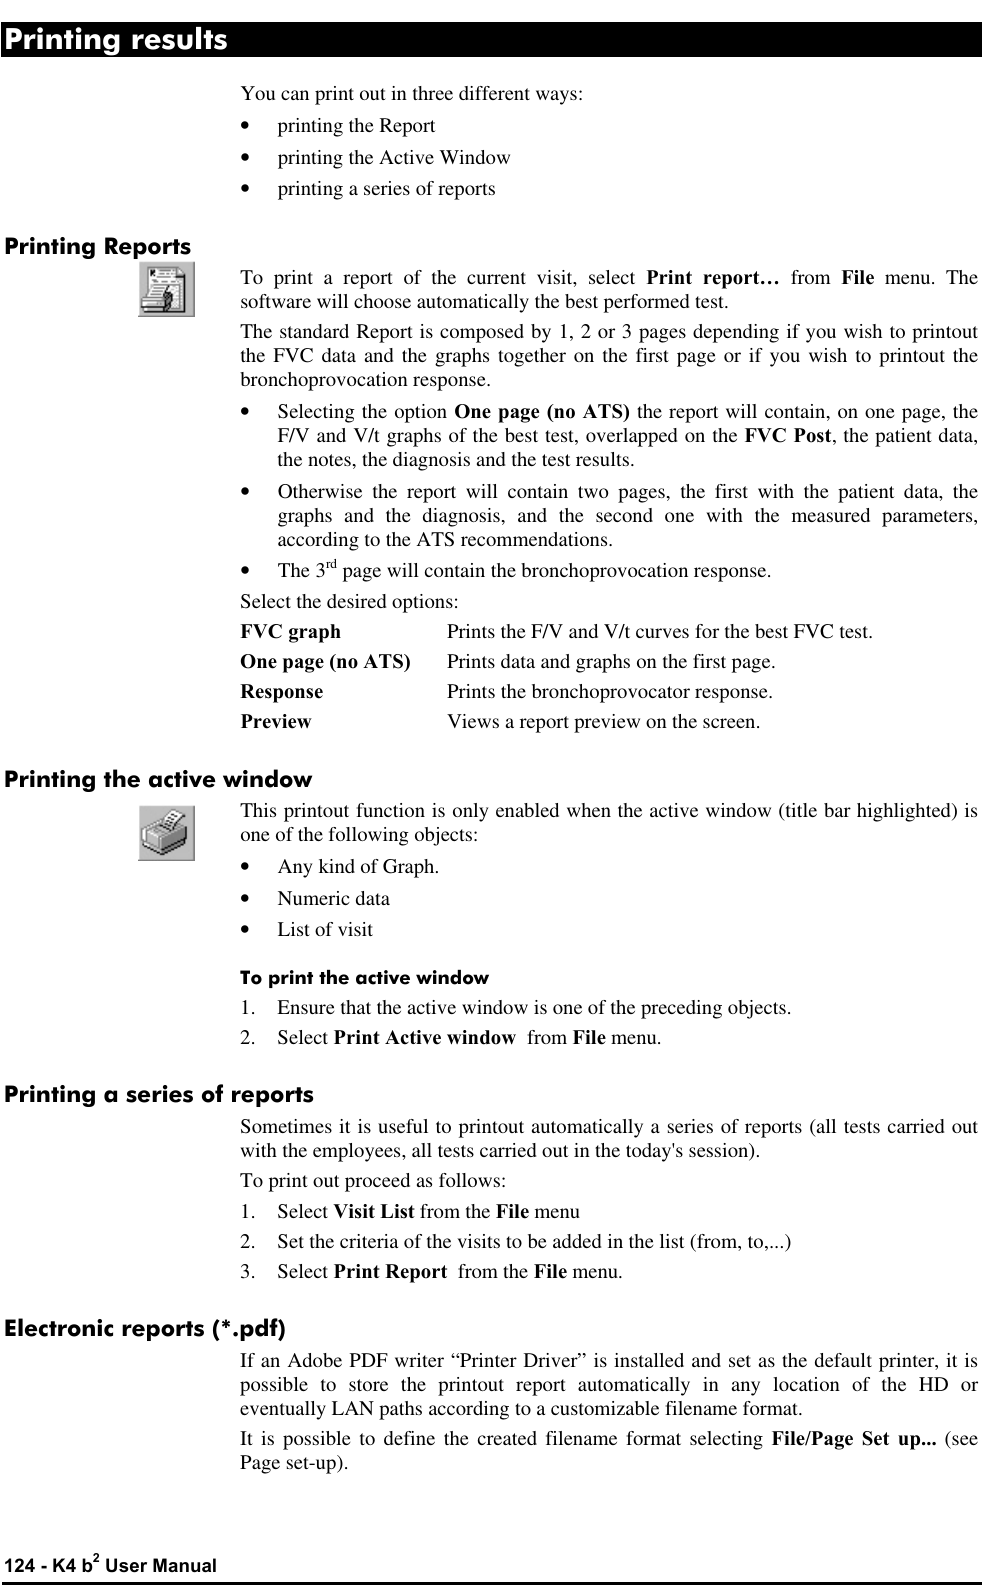  124 - K4 b2 User Manual Printing results You can print out in three different ways: • printing the Report • printing the Active Window • printing a series of reports Printing Reports To print a report of the current visit, select Print report… from File menu. The software will choose automatically the best performed test. The standard Report is composed by 1, 2 or 3 pages depending if you wish to printout the FVC data and the graphs together on the first page or if you wish to printout the bronchoprovocation response. • Selecting the option One page (no ATS) the report will contain, on one page, the F/V and V/t graphs of the best test, overlapped on the FVC Post, the patient data, the notes, the diagnosis and the test results. • Otherwise the report will contain two pages, the first with the patient data, the graphs and the diagnosis, and the second one with the measured parameters, according to the ATS recommendations. • The 3rd page will contain the bronchoprovocation response. Select the desired options: FVC graph Prints the F/V and V/t curves for the best FVC test. One page (no ATS) Prints data and graphs on the first page. Response Prints the bronchoprovocator response. Preview Views a report preview on the screen. Printing the active window This printout function is only enabled when the active window (title bar highlighted) is one of the following objects: • Any kind of Graph. • Numeric data • List of visit To print the active window 1. Ensure that the active window is one of the preceding objects. 2. Select Print Active window  from File menu. Printing a series of reports Sometimes it is useful to printout automatically a series of reports (all tests carried out with the employees, all tests carried out in the today&apos;s session). To print out proceed as follows: 1. Select Visit List from the File menu 2. Set the criteria of the visits to be added in the list (from, to,...) 3. Select Print Report  from the File menu. Electronic reports (*.pdf) If an Adobe PDF writer “Printer Driver” is installed and set as the default printer, it is possible to store the printout report automatically in any location of the HD or eventually LAN paths according to a customizable filename format. It is possible to define the created filename format selecting File/Page Set up... (see Page set-up). 